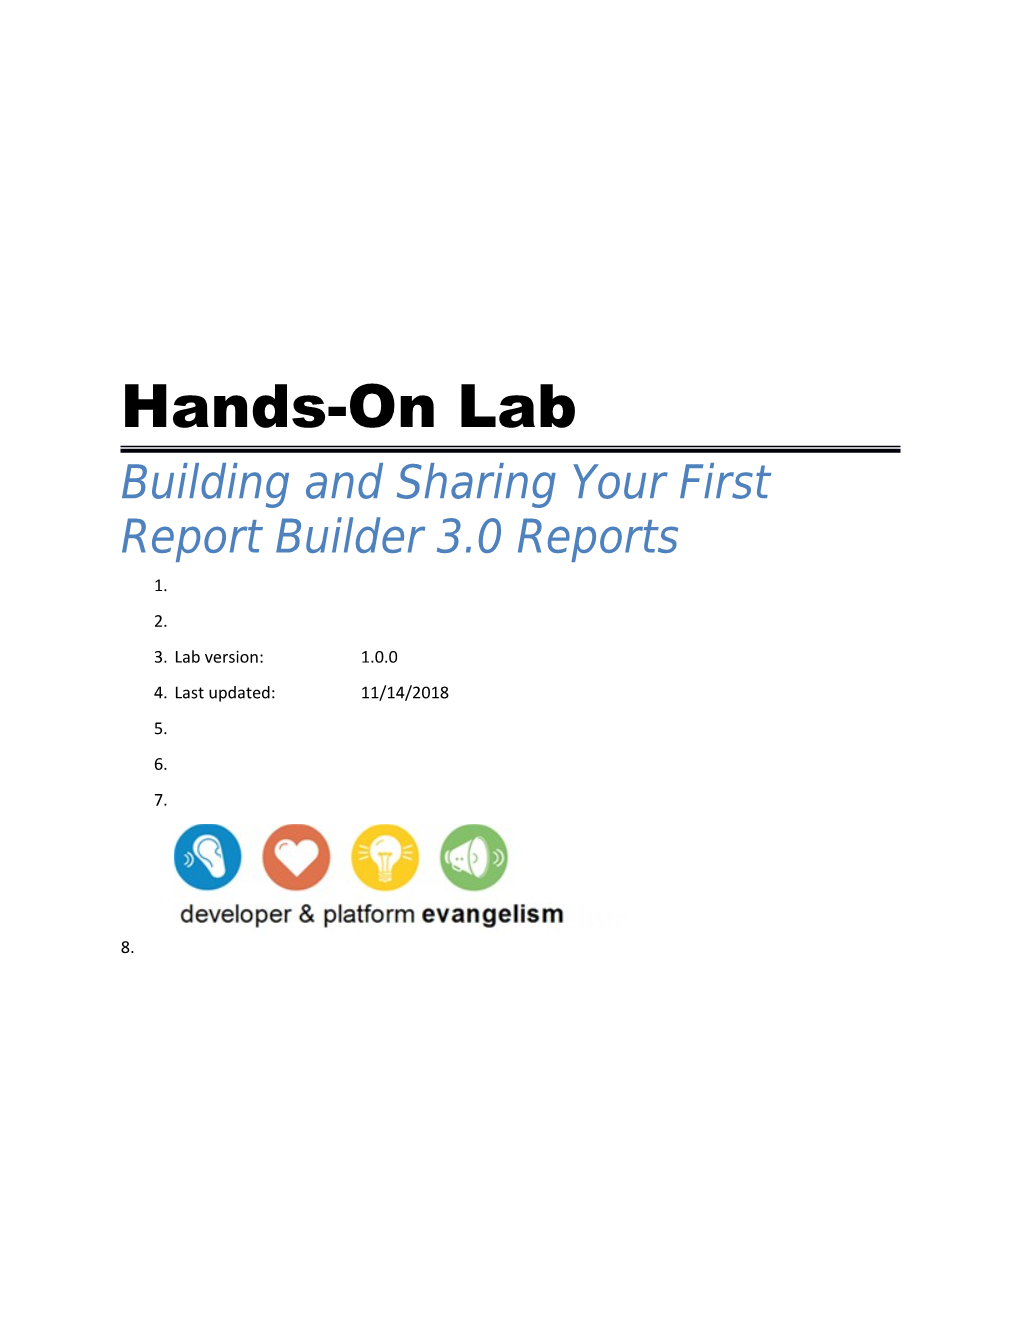 Hands on Lab: Building and Sharing Your First Report Builder 3.0 Report